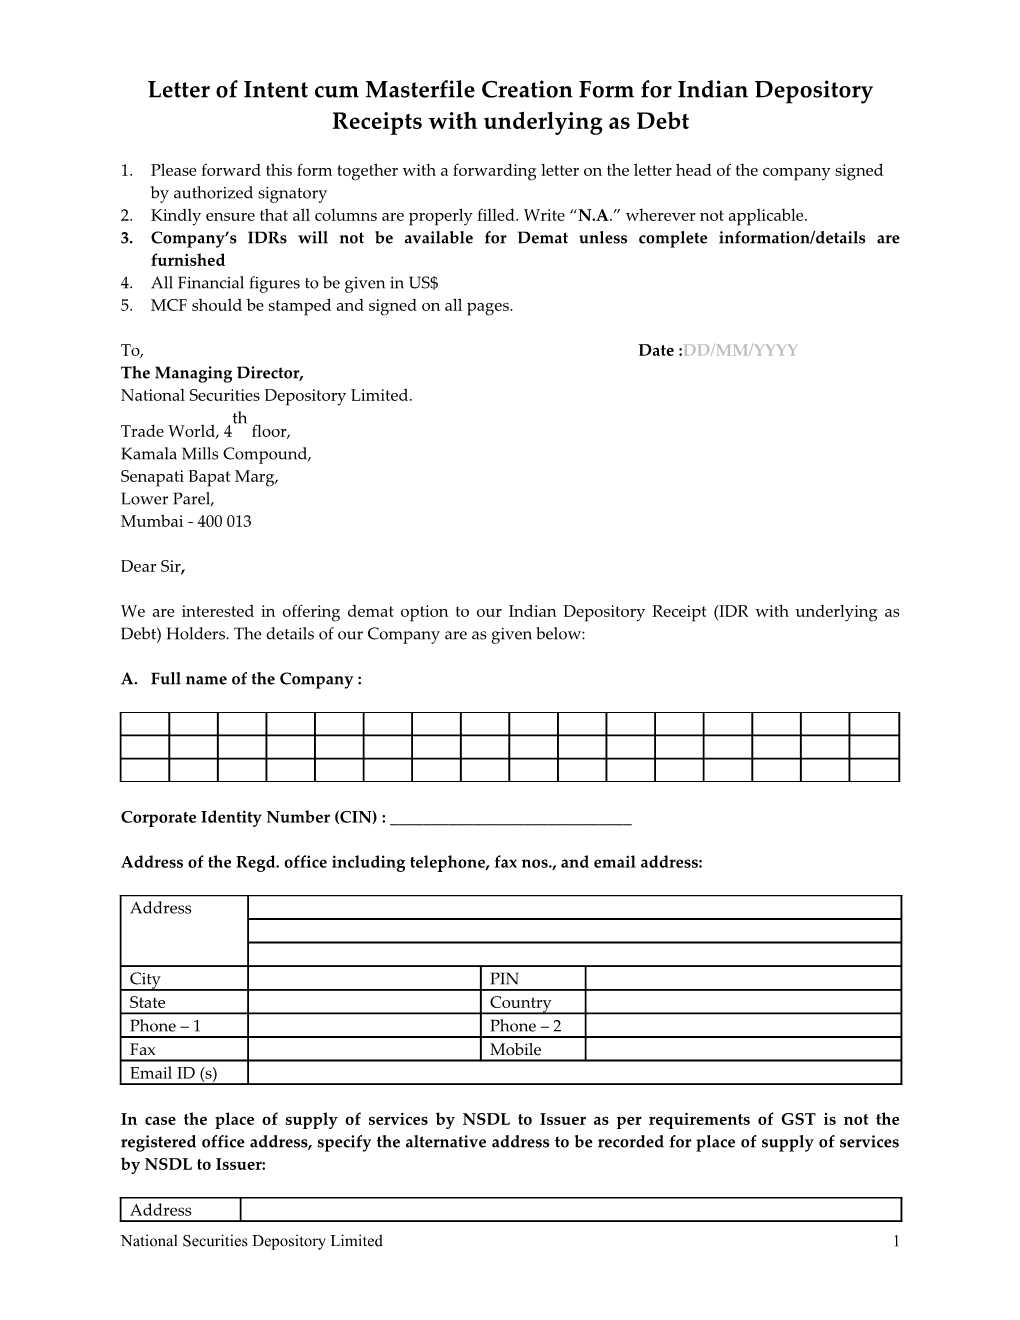 Letter of Intent Cum Masterfile Creation Form for Indian Depository Receipts with Underlying